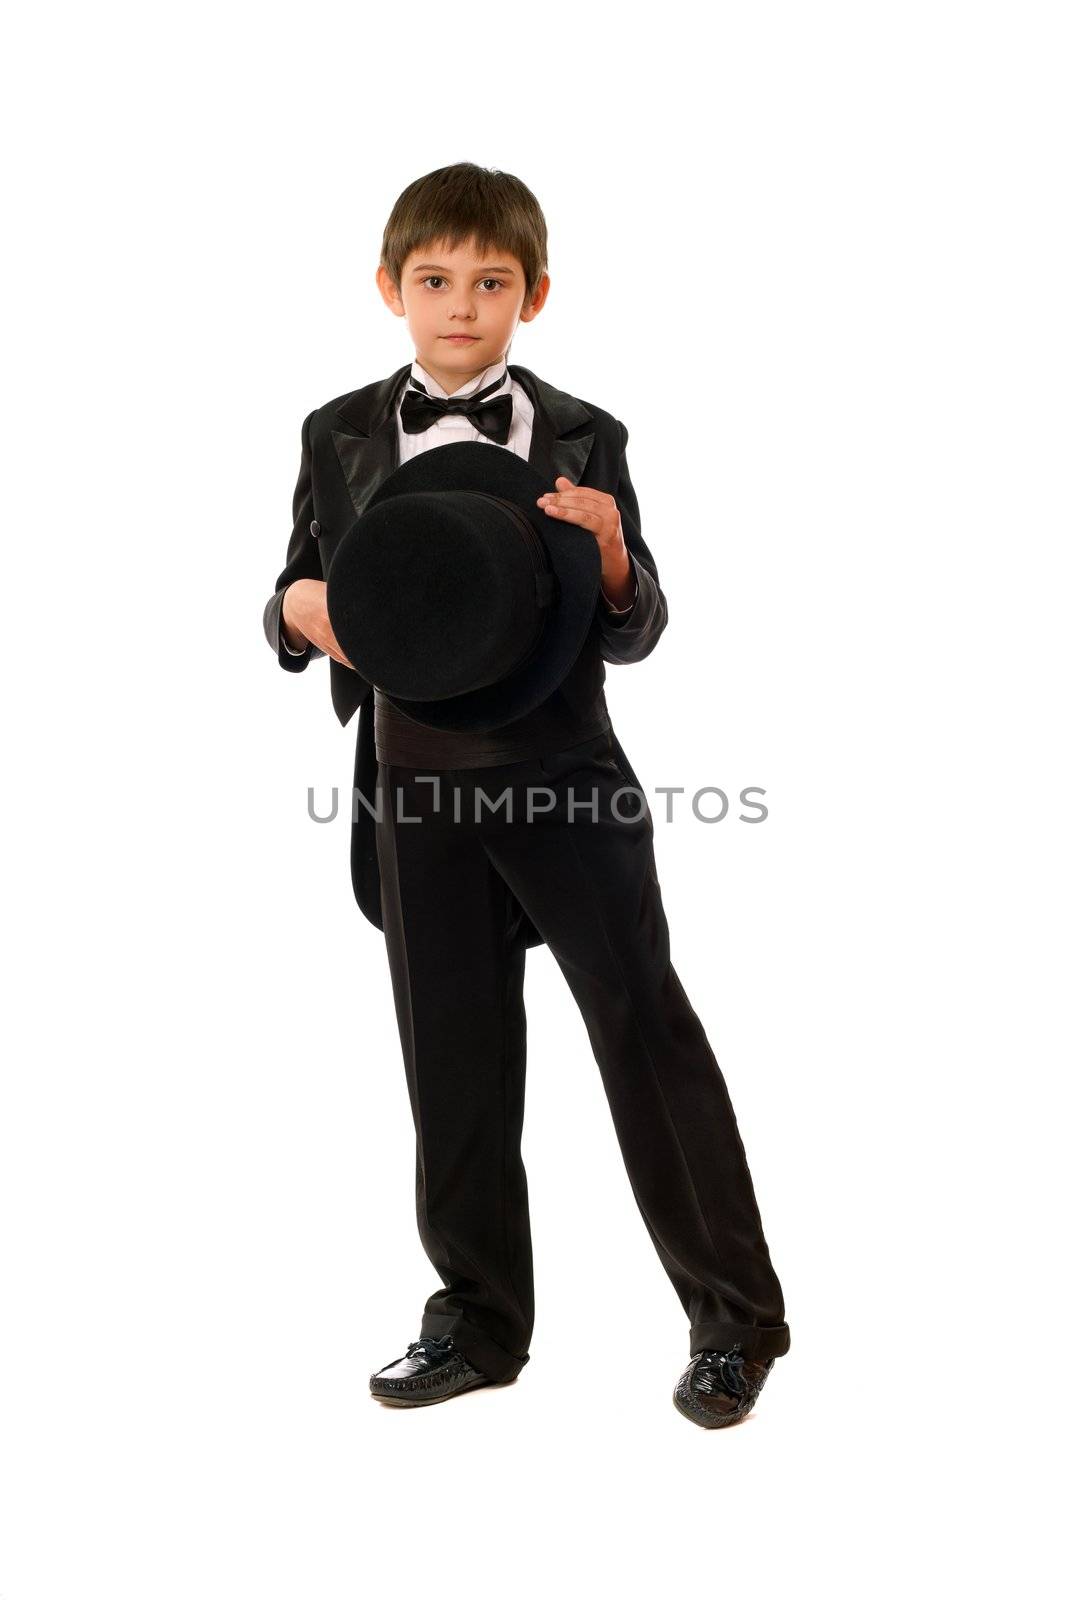 Little boy in tuxedo with a hat by acidgrey